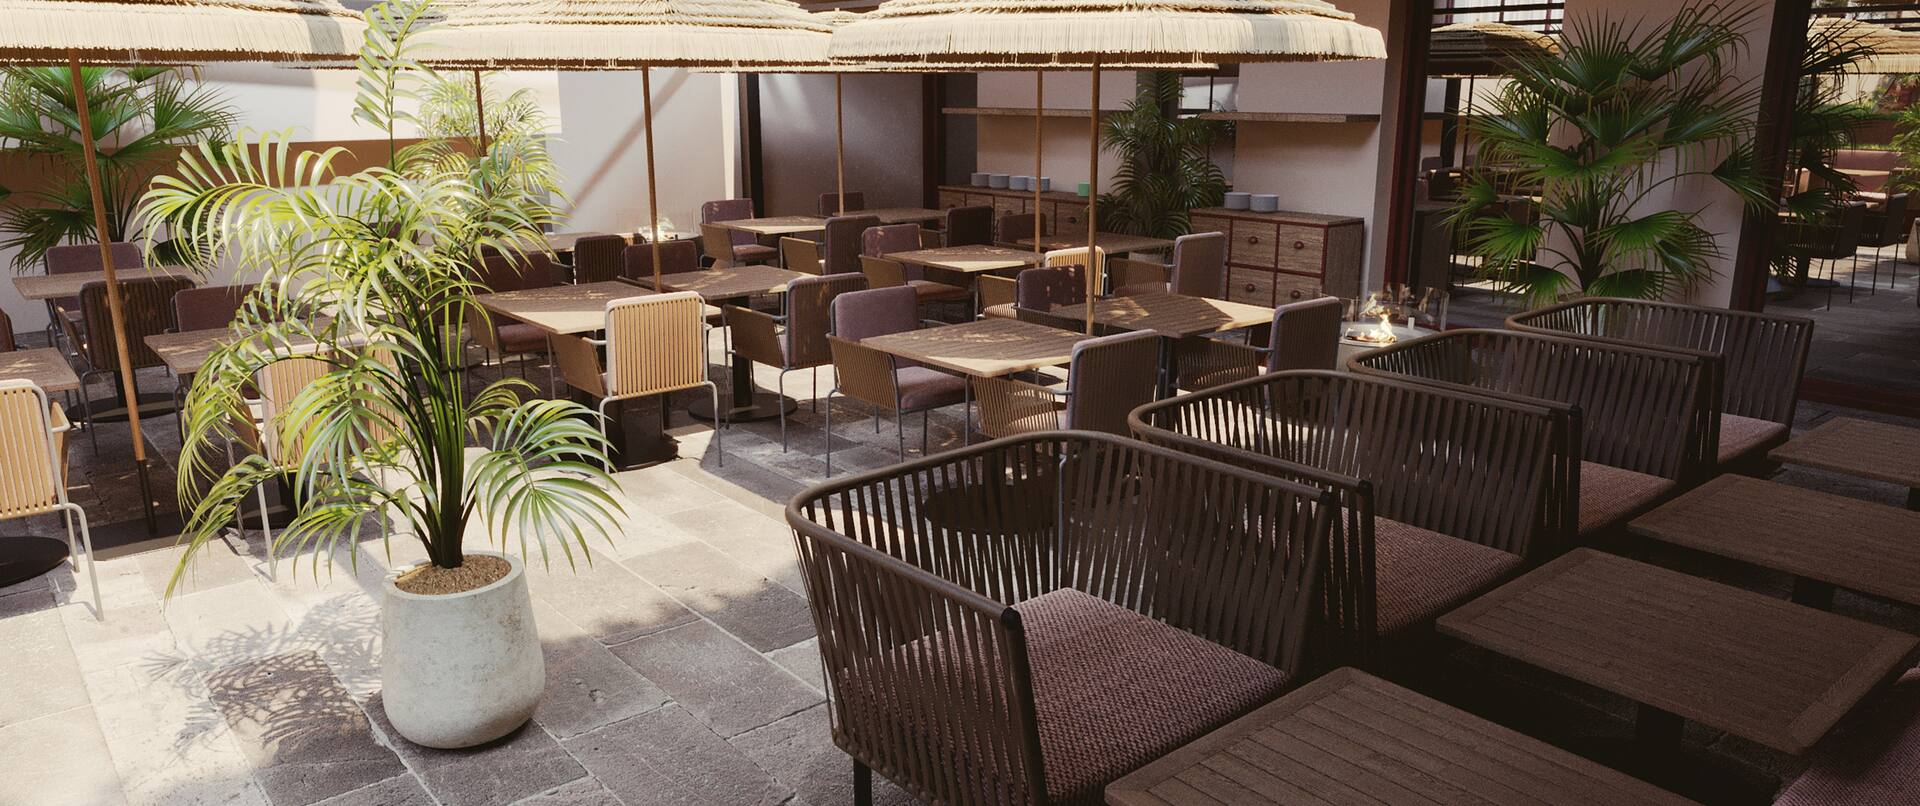 outdoor seating terrace